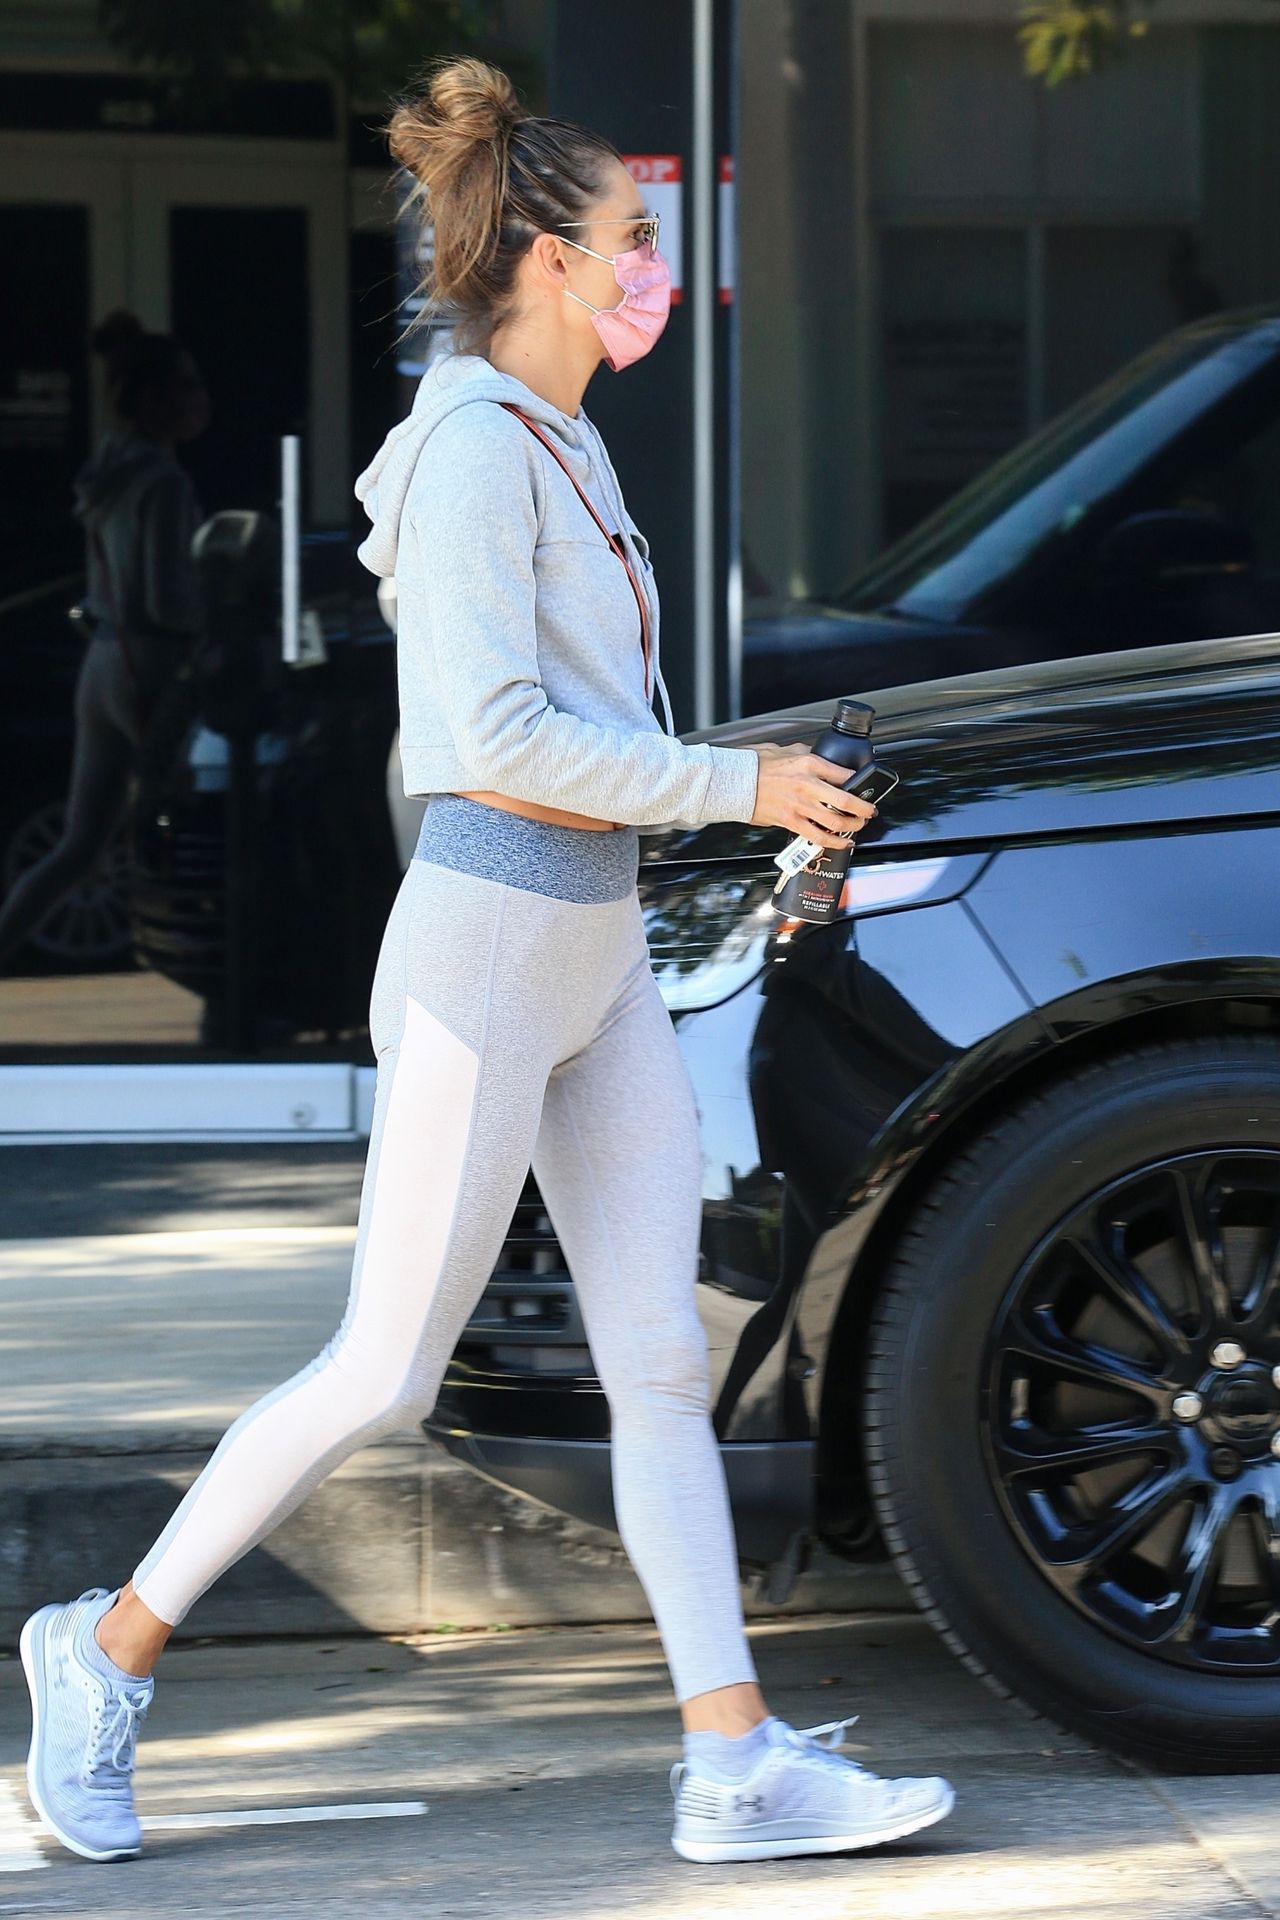 Alessandra Ambrosio Looks Fabulous In Grey Leggings at the Gym (94 Photos)